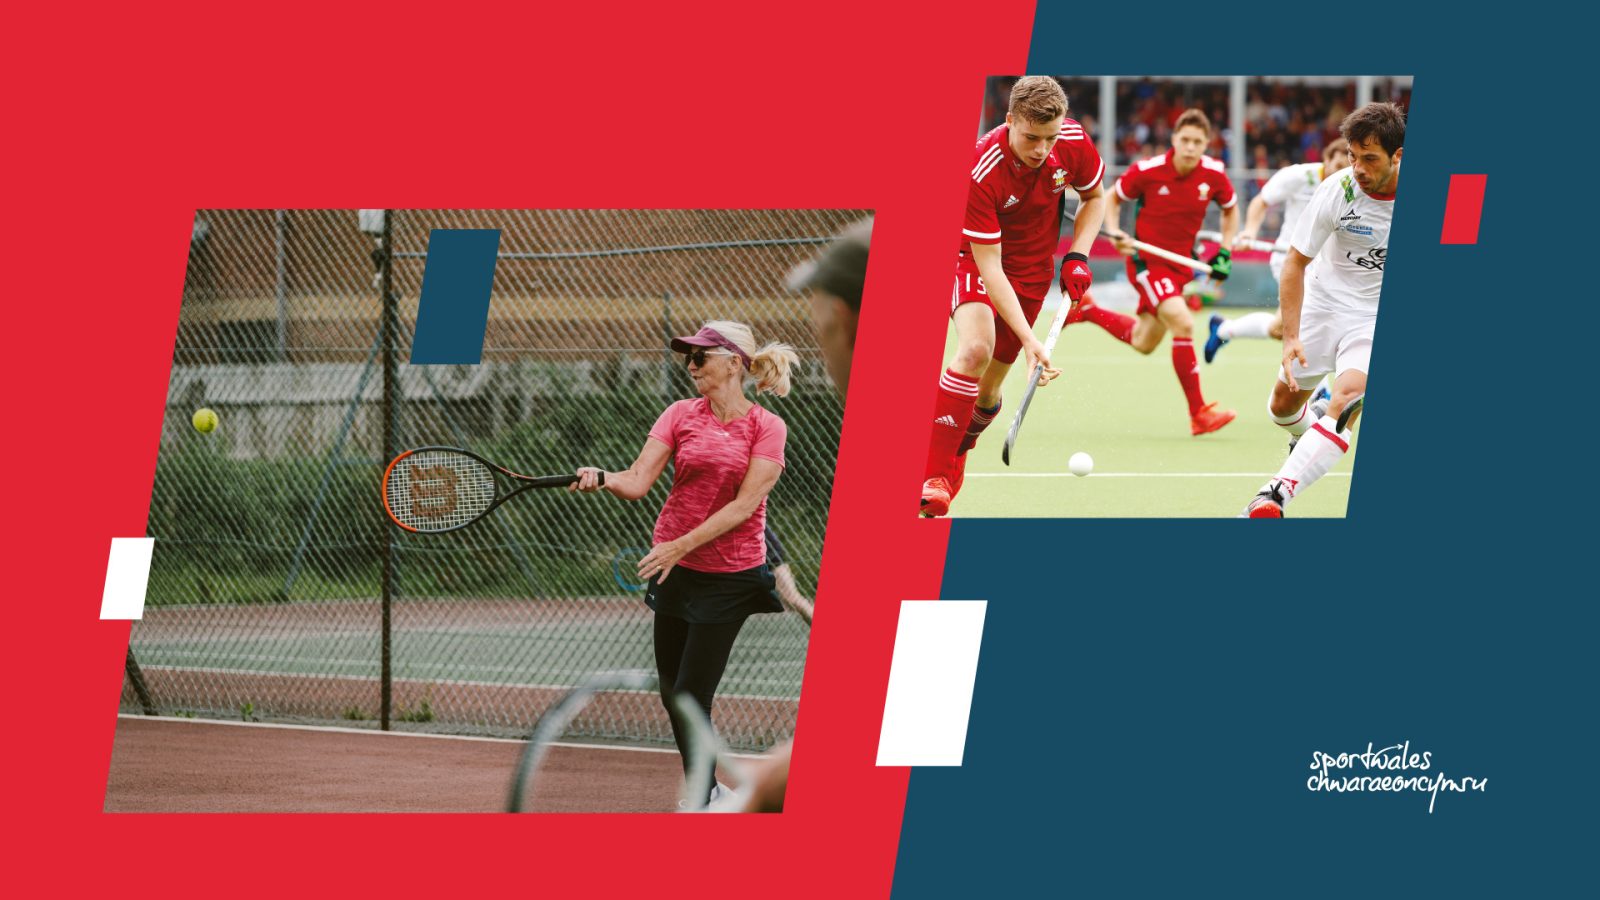 Collage of two sports scenes: on the left, a woman playing tennis on a clay court; on the right, a men's field hockey match in action. The images feature geometric shapes overlay and